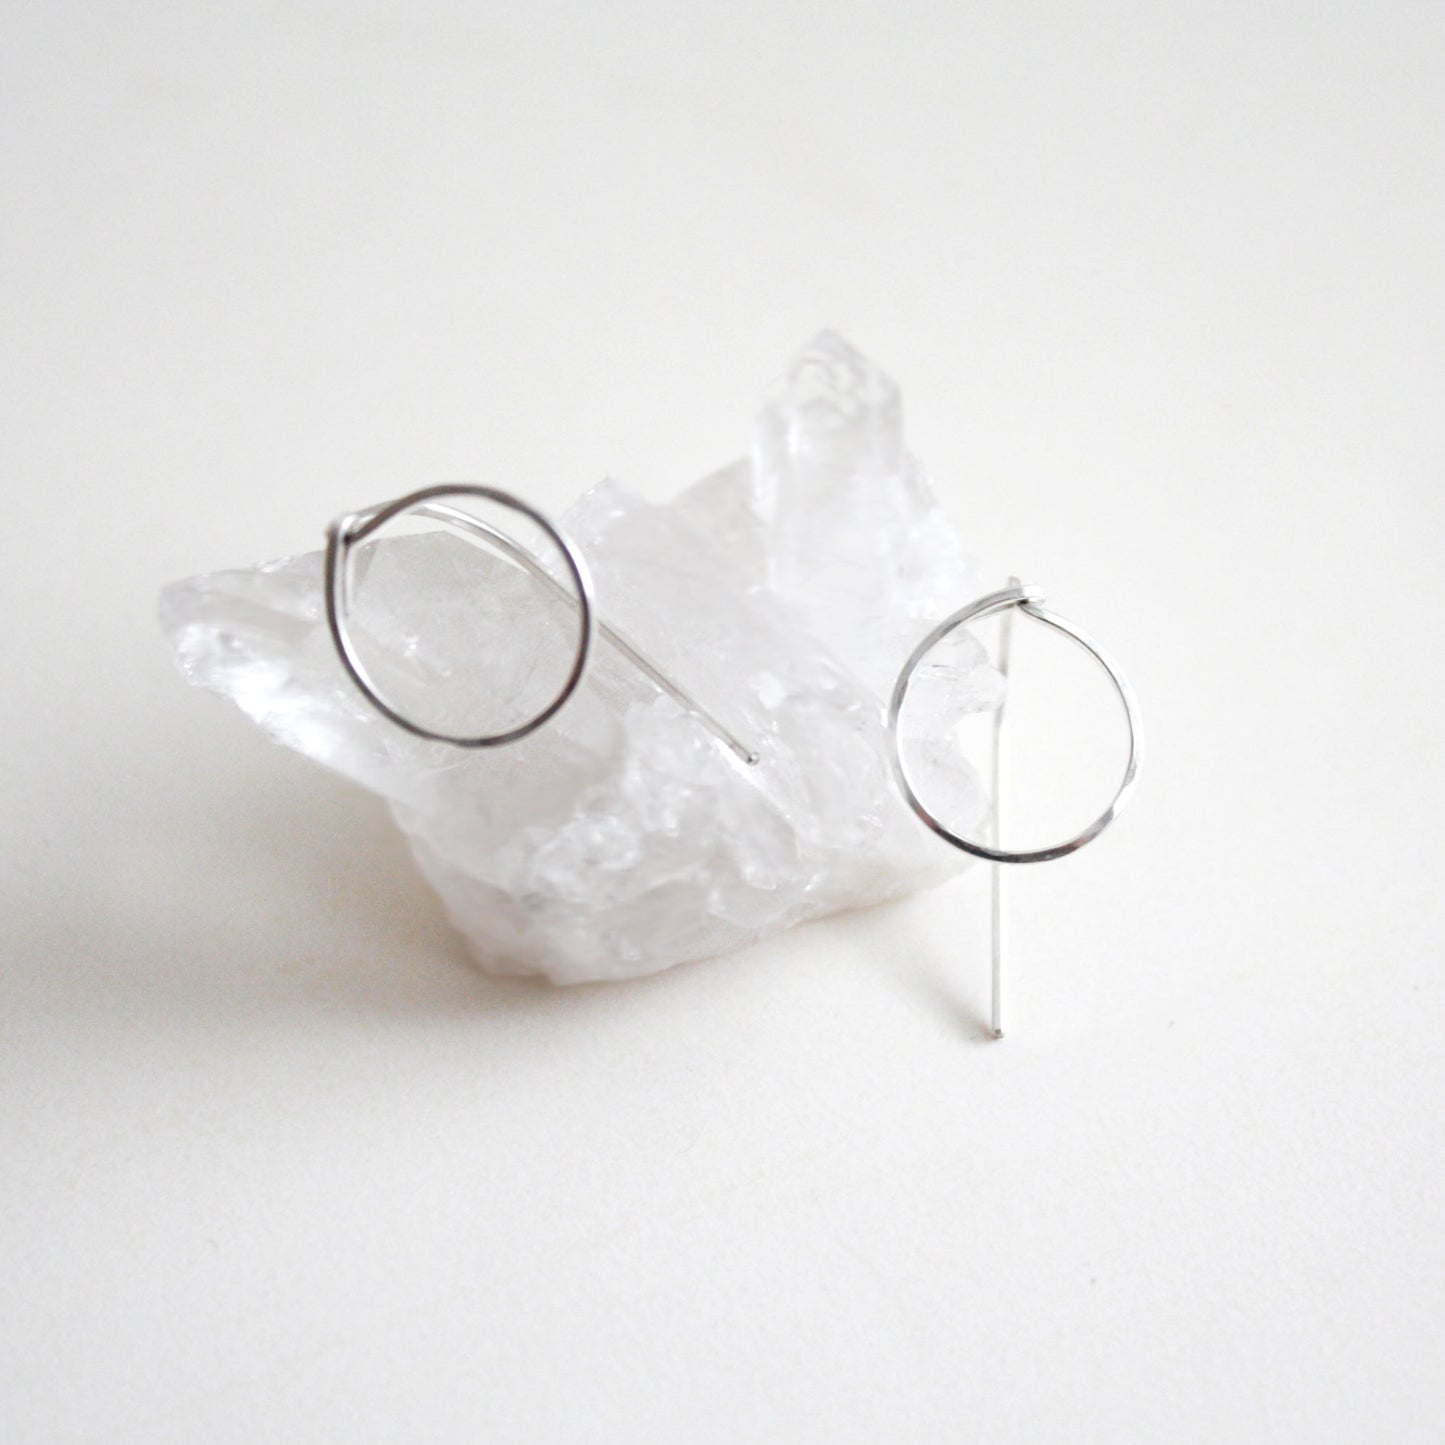 Hammered Circle Threader Earrings - Small